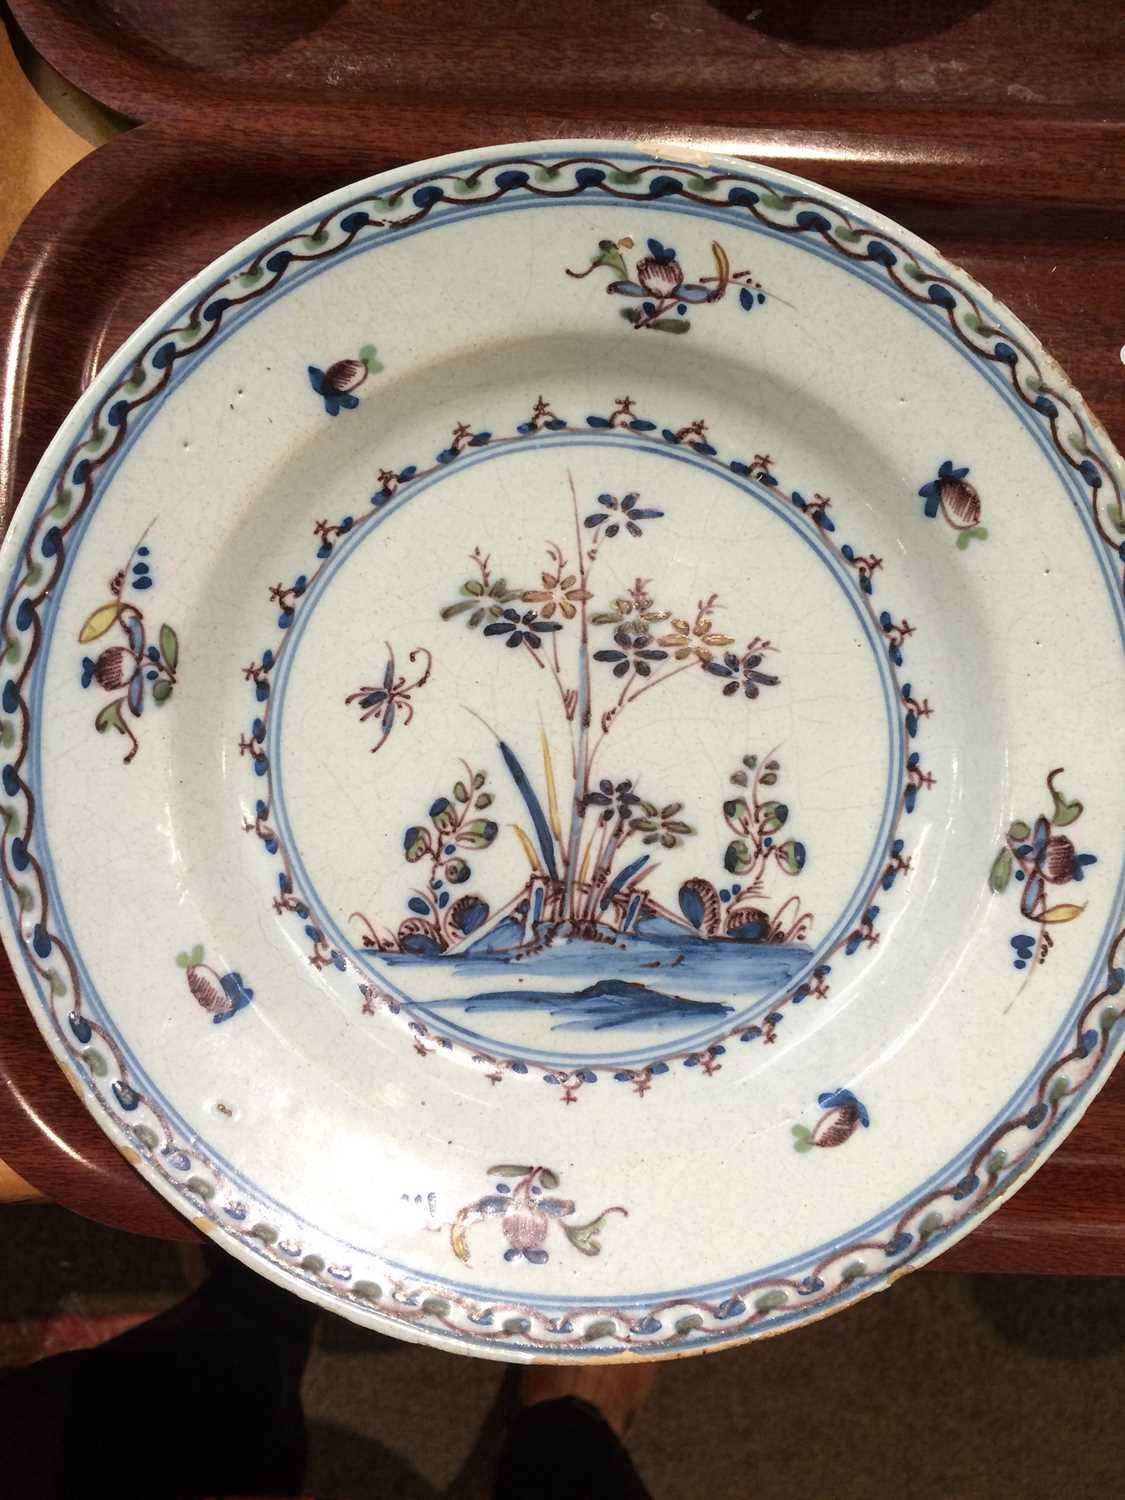 An English Delft Plate, 18th century, painted with a roundel landscape in blue, green, manganese and - Image 7 of 9